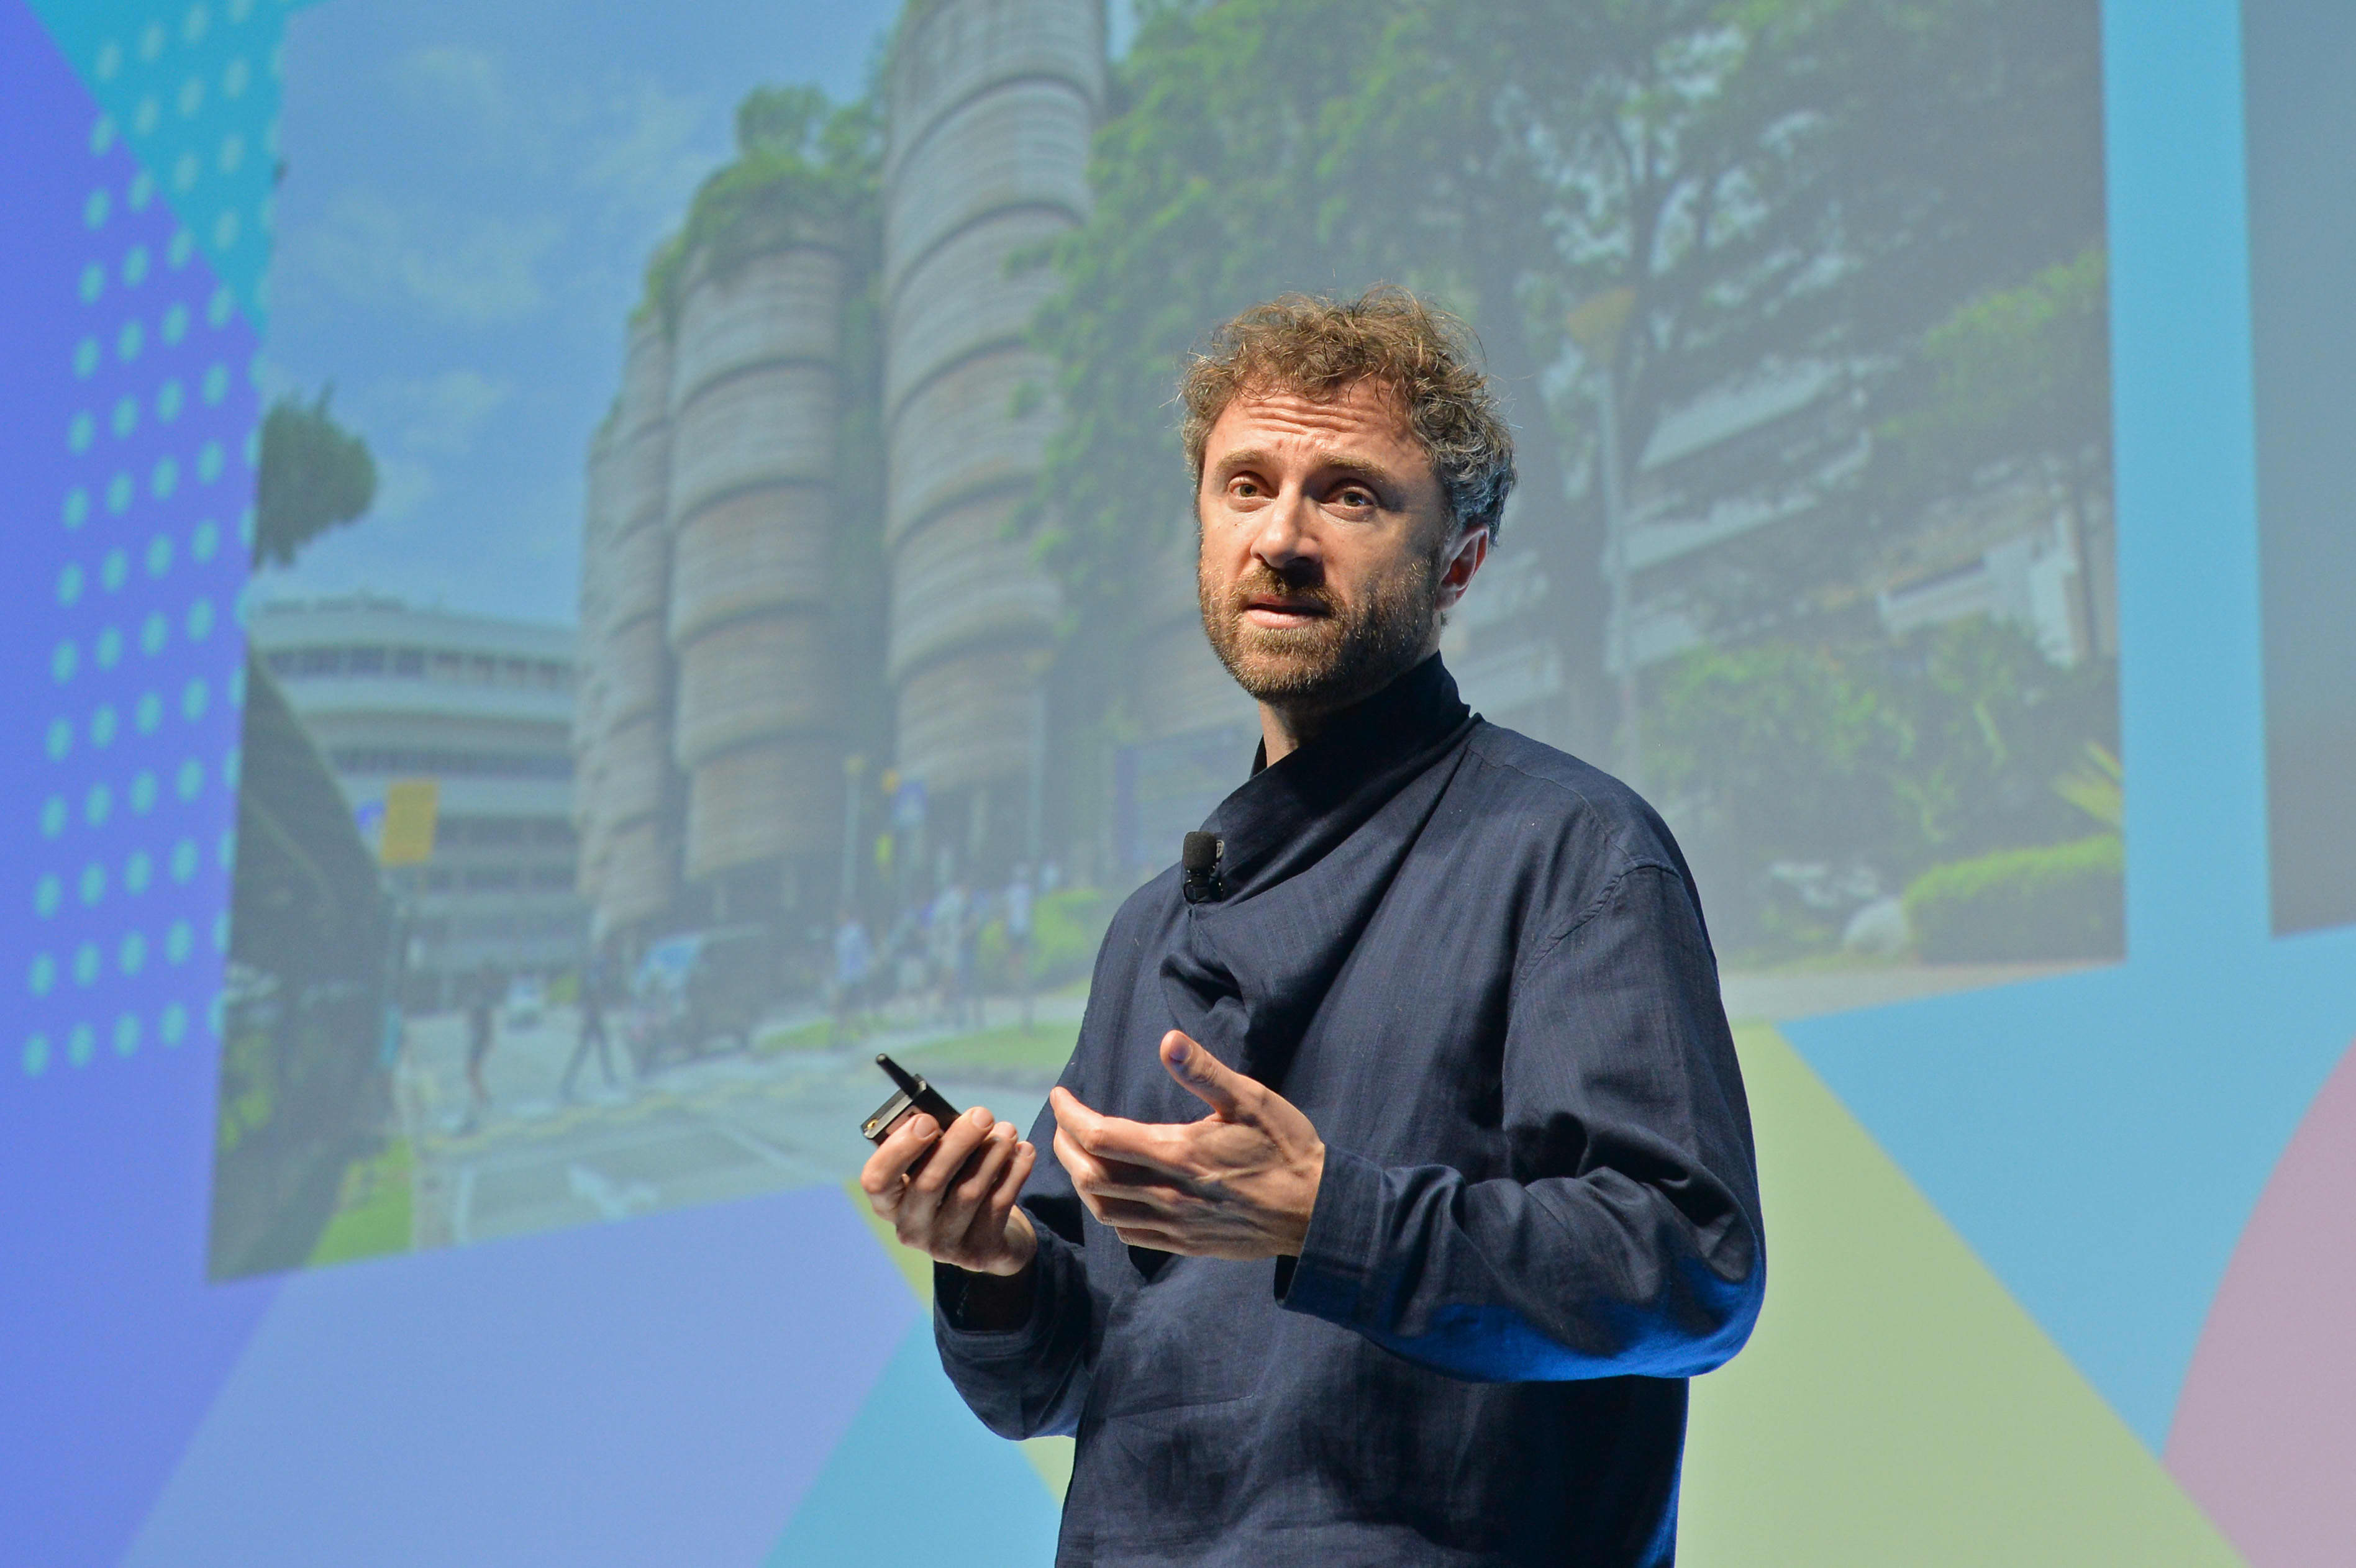 Thomas Heatherwick says Larry Page dinner led to a journey